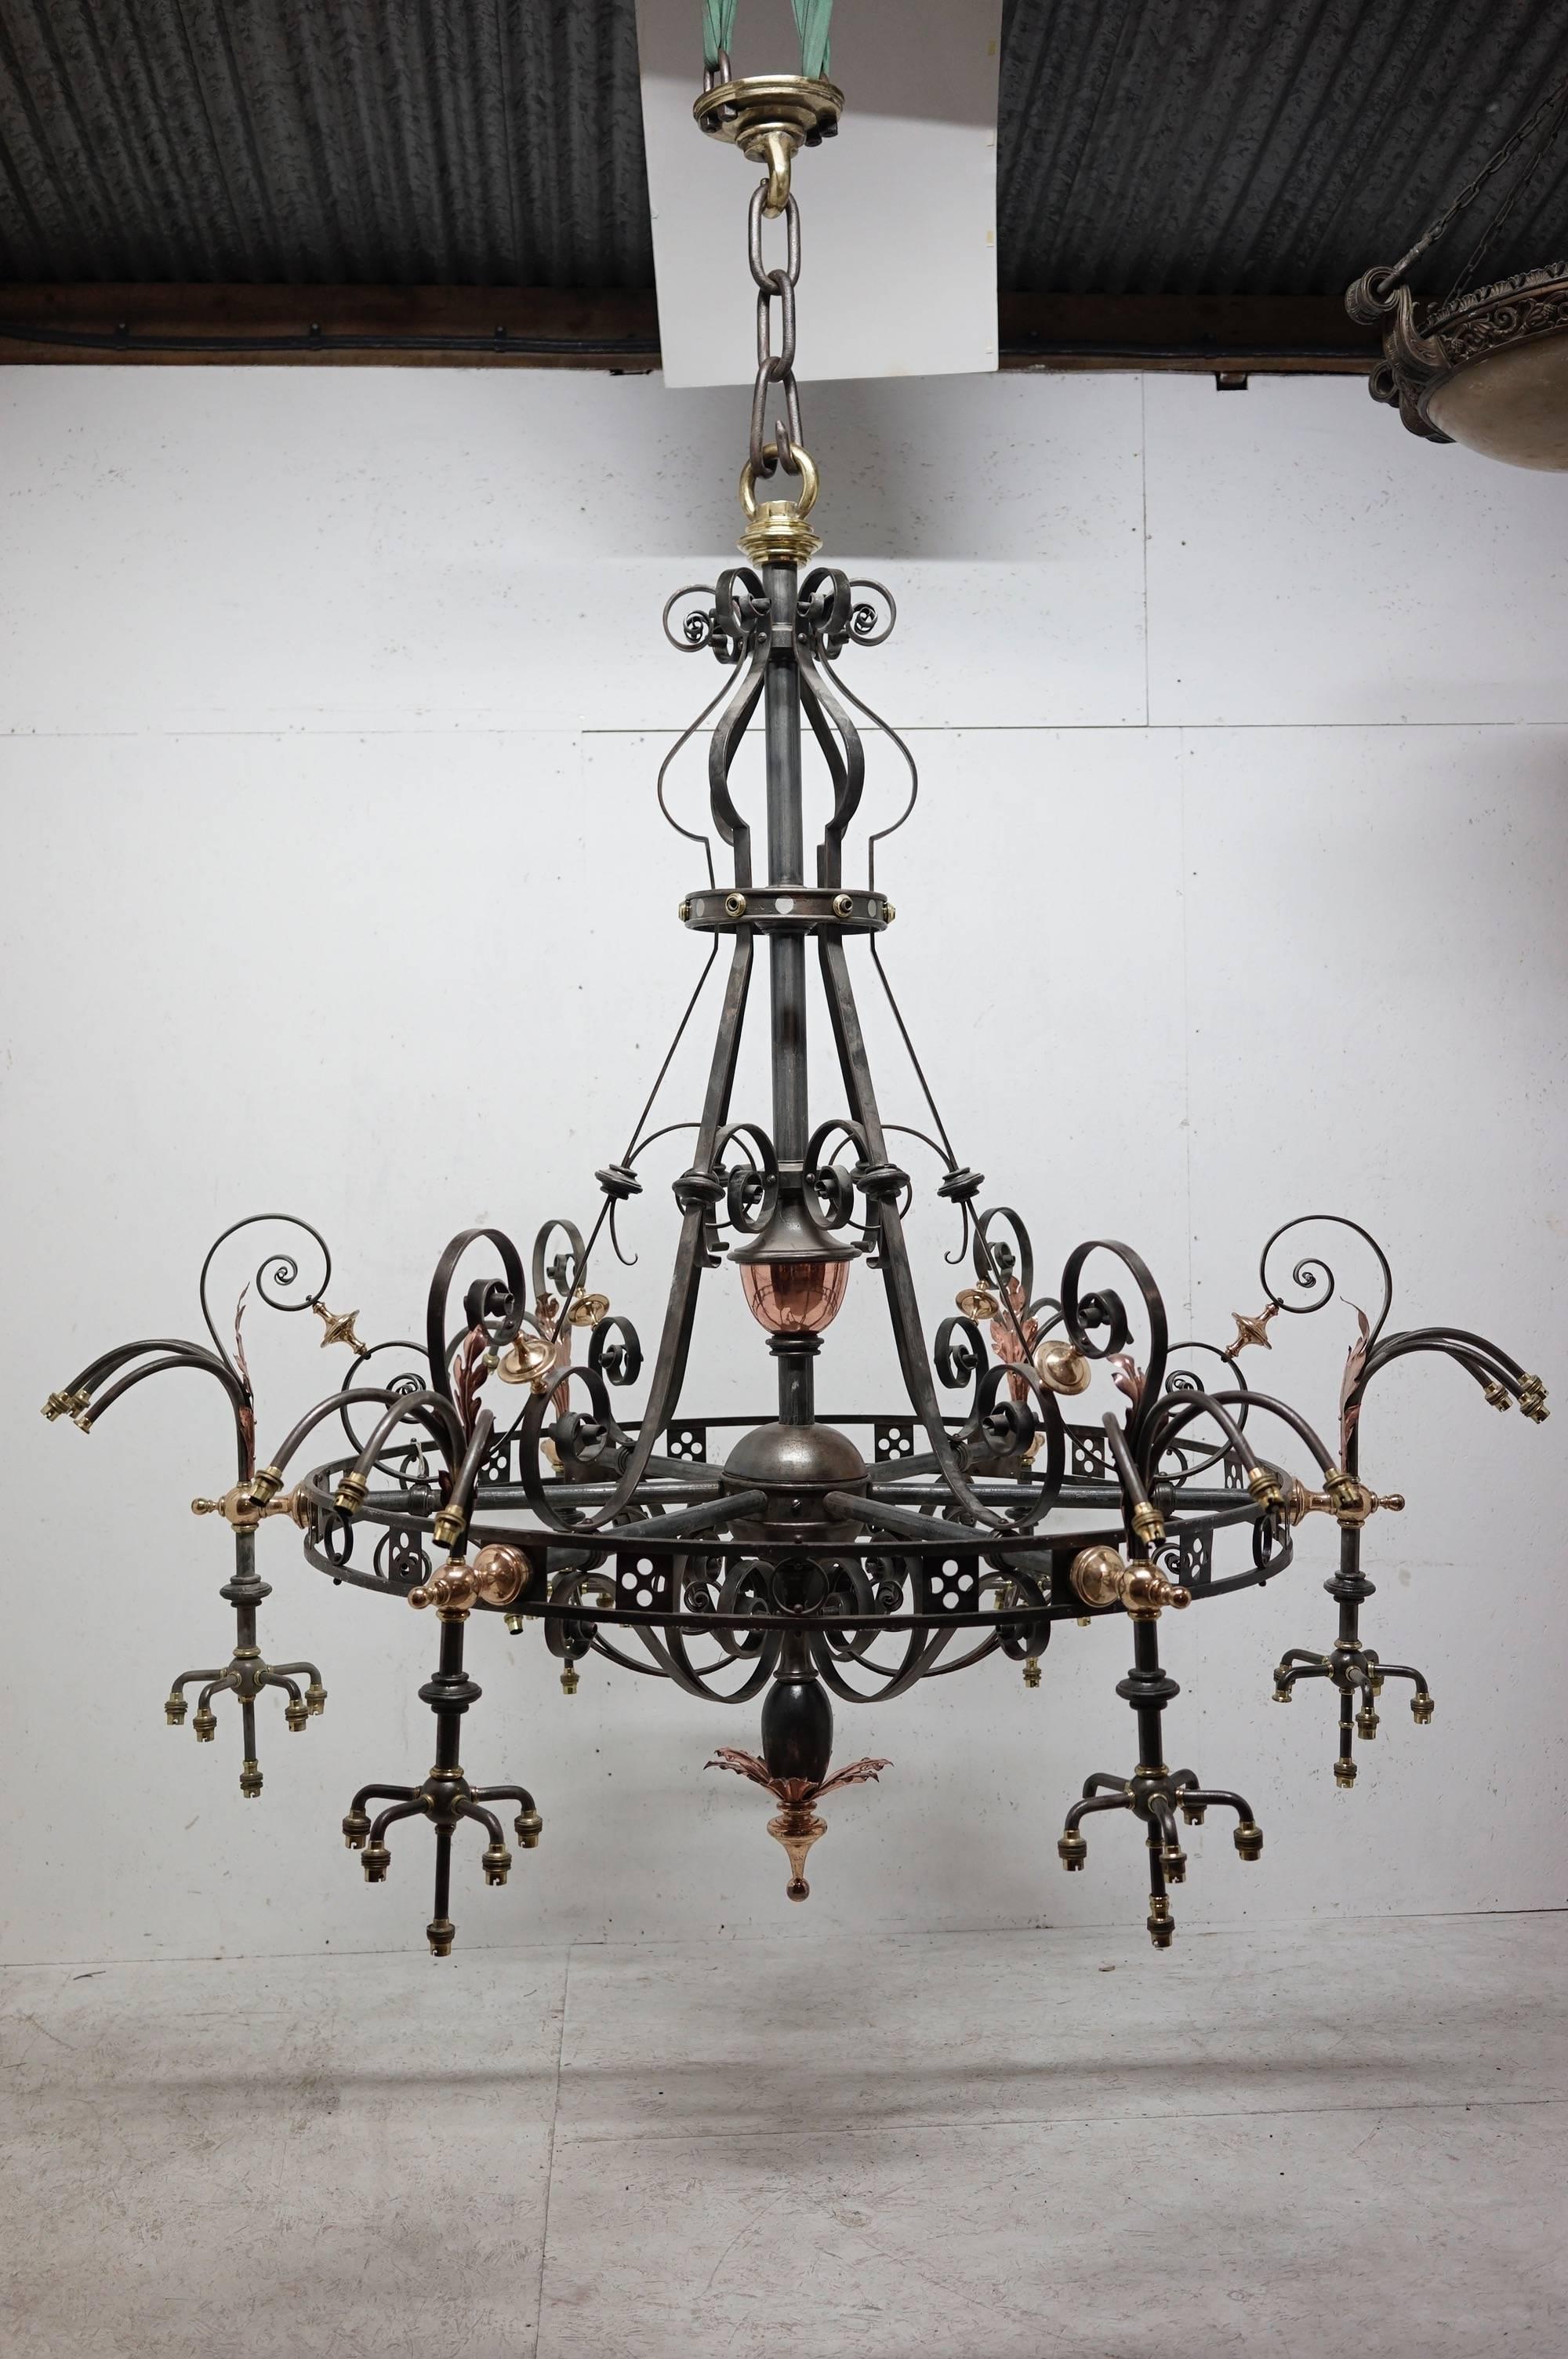 An outstanding enormous Arts & Crafts brass and iron chandelier with a subtle Gothic Revival influence originally from St Georges Church in Glasgow. Measure: 9' high x 7' 4